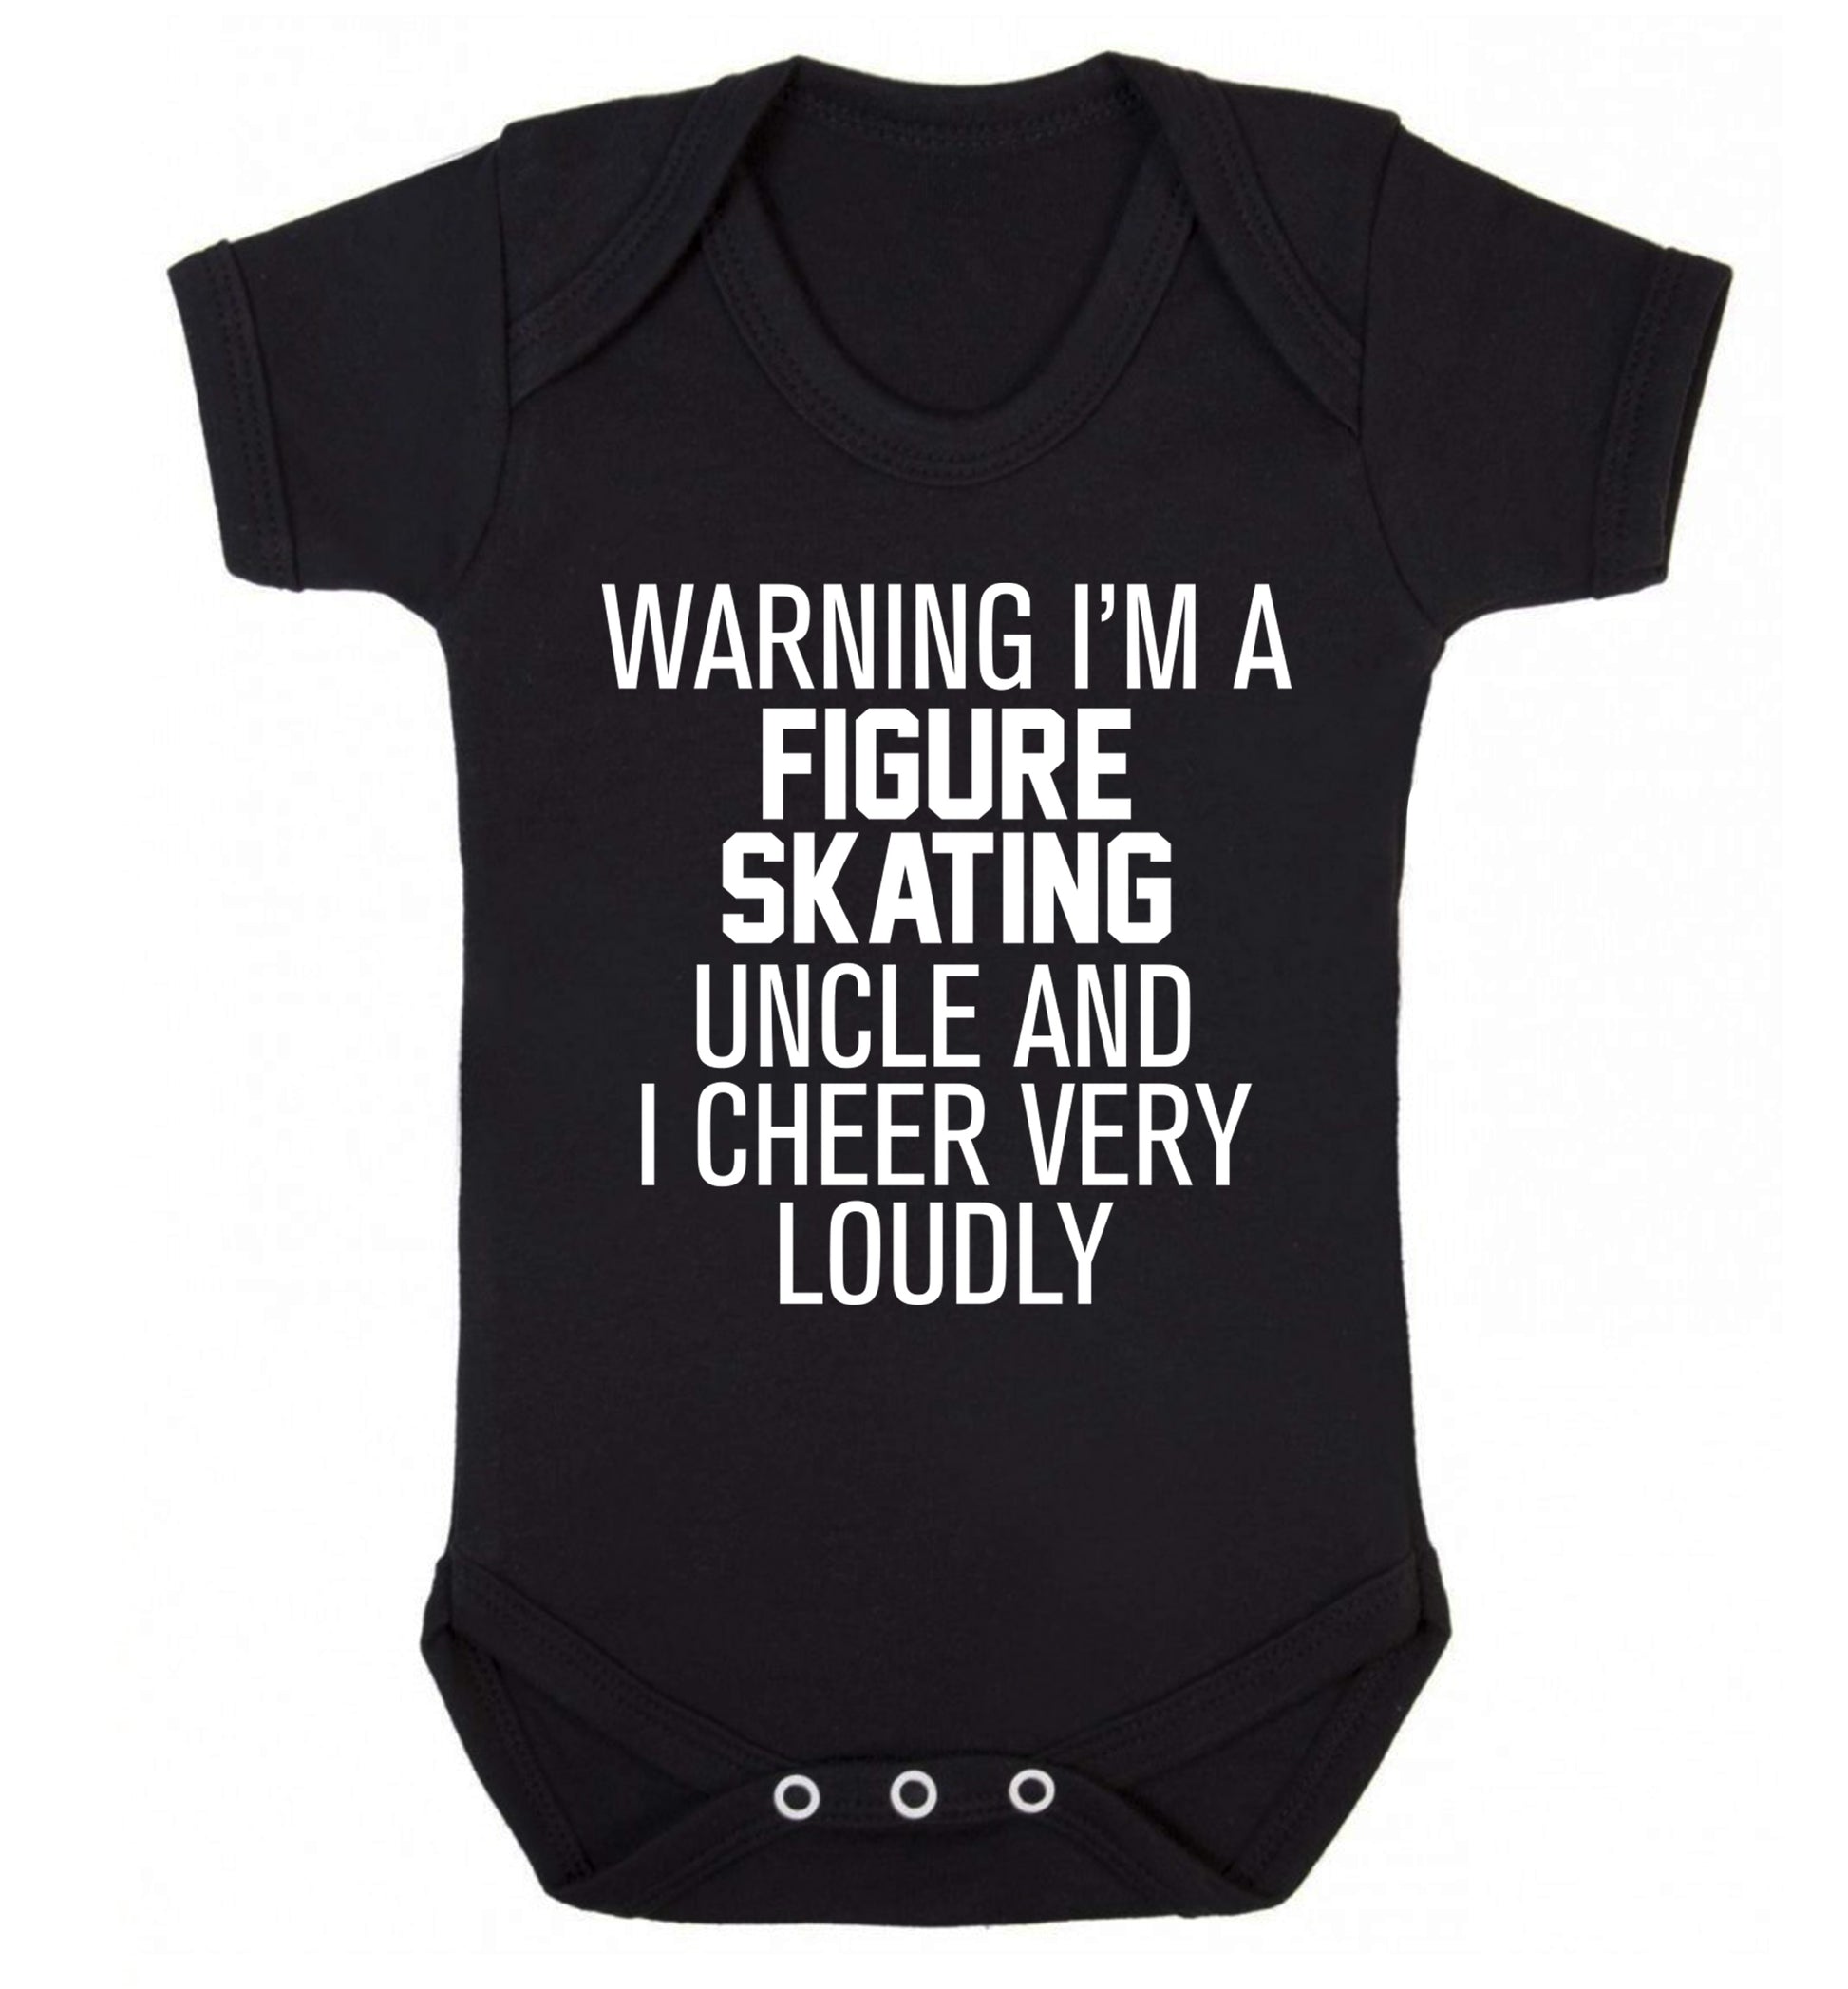 Warning I'm a figure skating uncle and I cheer very loudly Baby Vest black 18-24 months